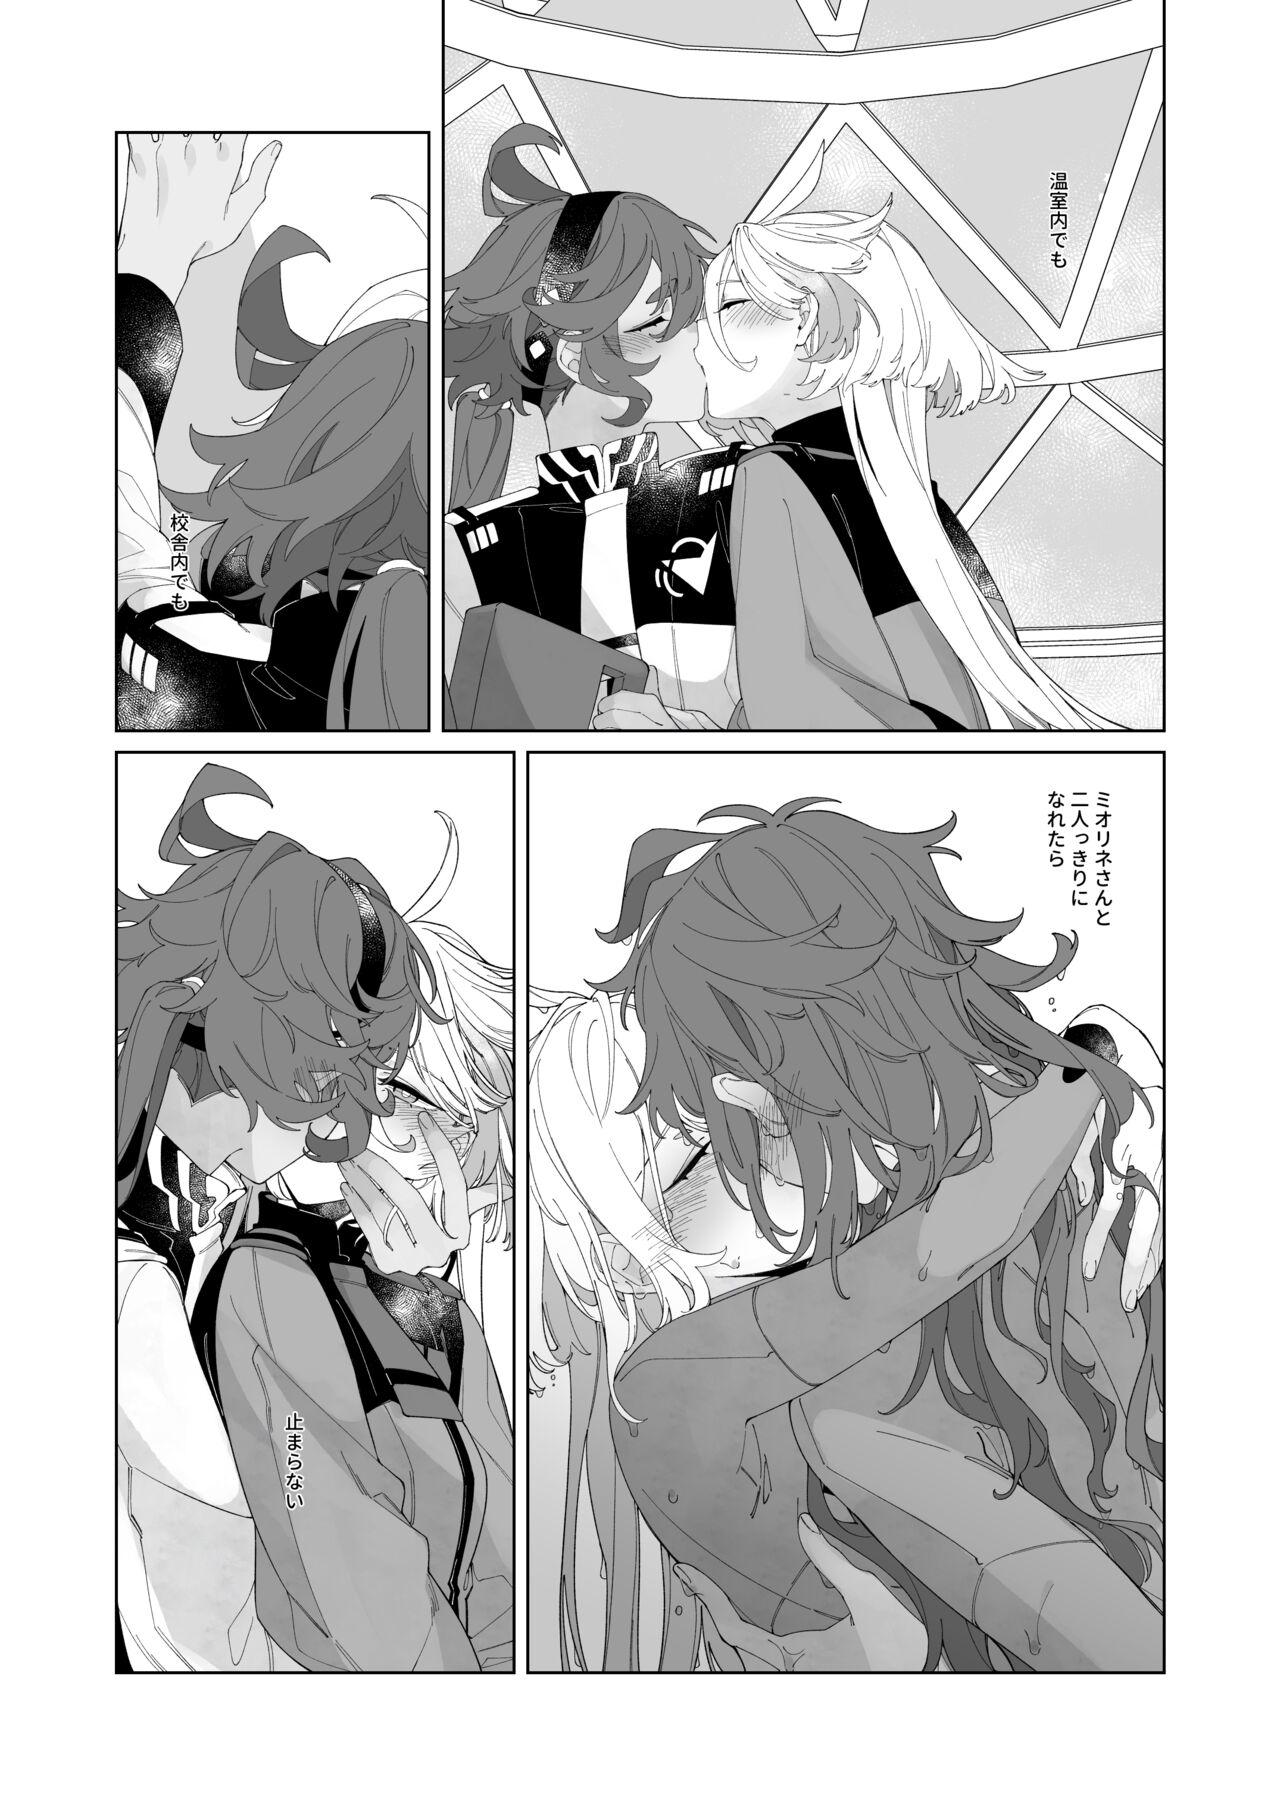 Banho Kiss no Ato Nani ga Shitai? - After kissing, what else do you want to do? - Mobile suit gundam the witch from mercury Thong - Page 9